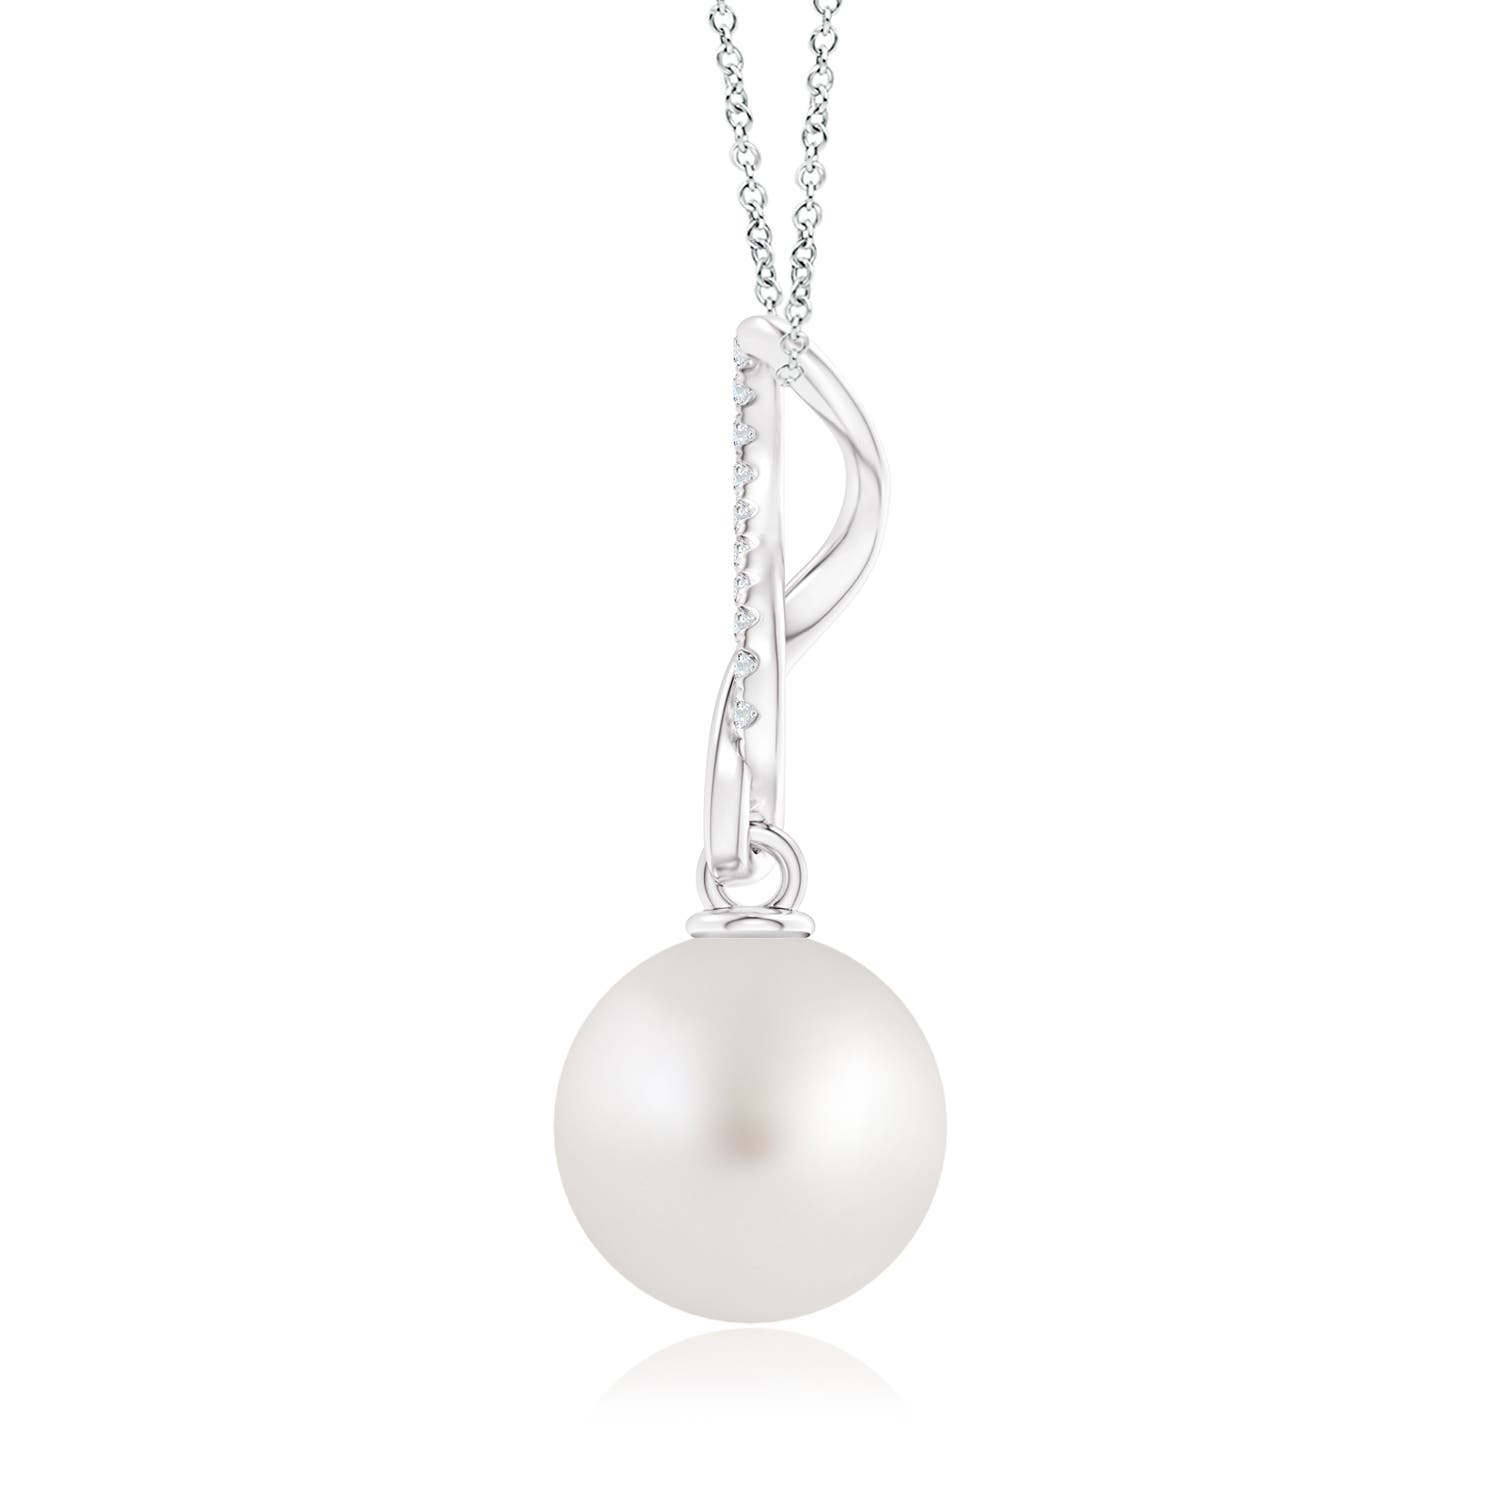 AA - South Sea Cultured Pearl / 7.26 CT / 14 KT White Gold